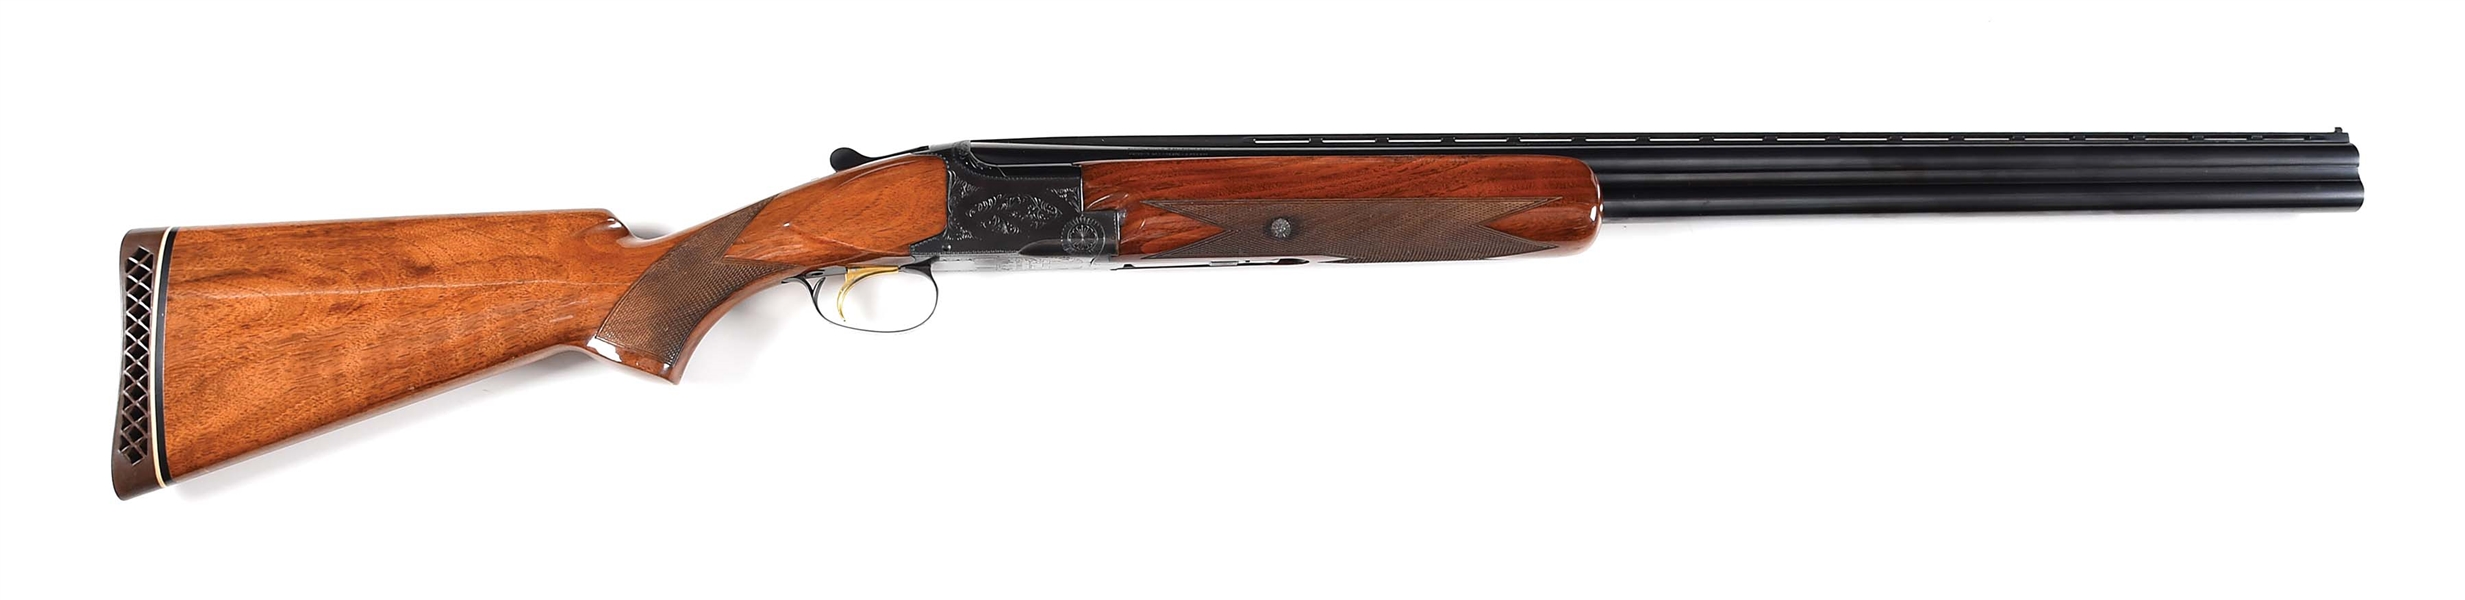 (C) BROWNING SUPERPOSED LIGHTNING 12 BORE OVER UNDER SHOTGUN WITH CASE.